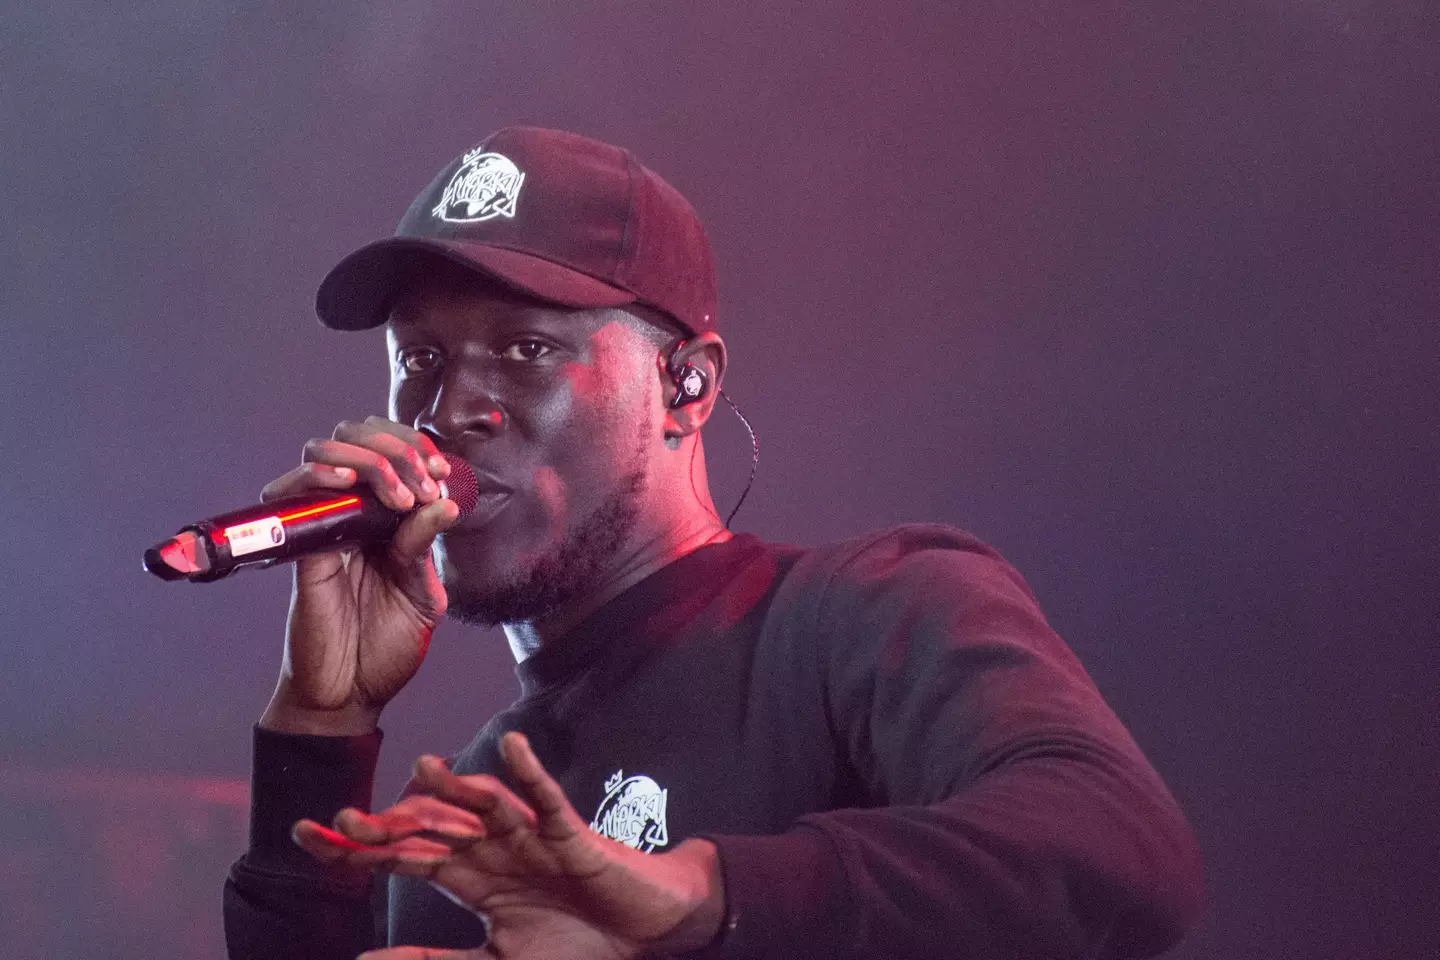 Stormzy has opened up about why he distanced himself from social media two years ago.